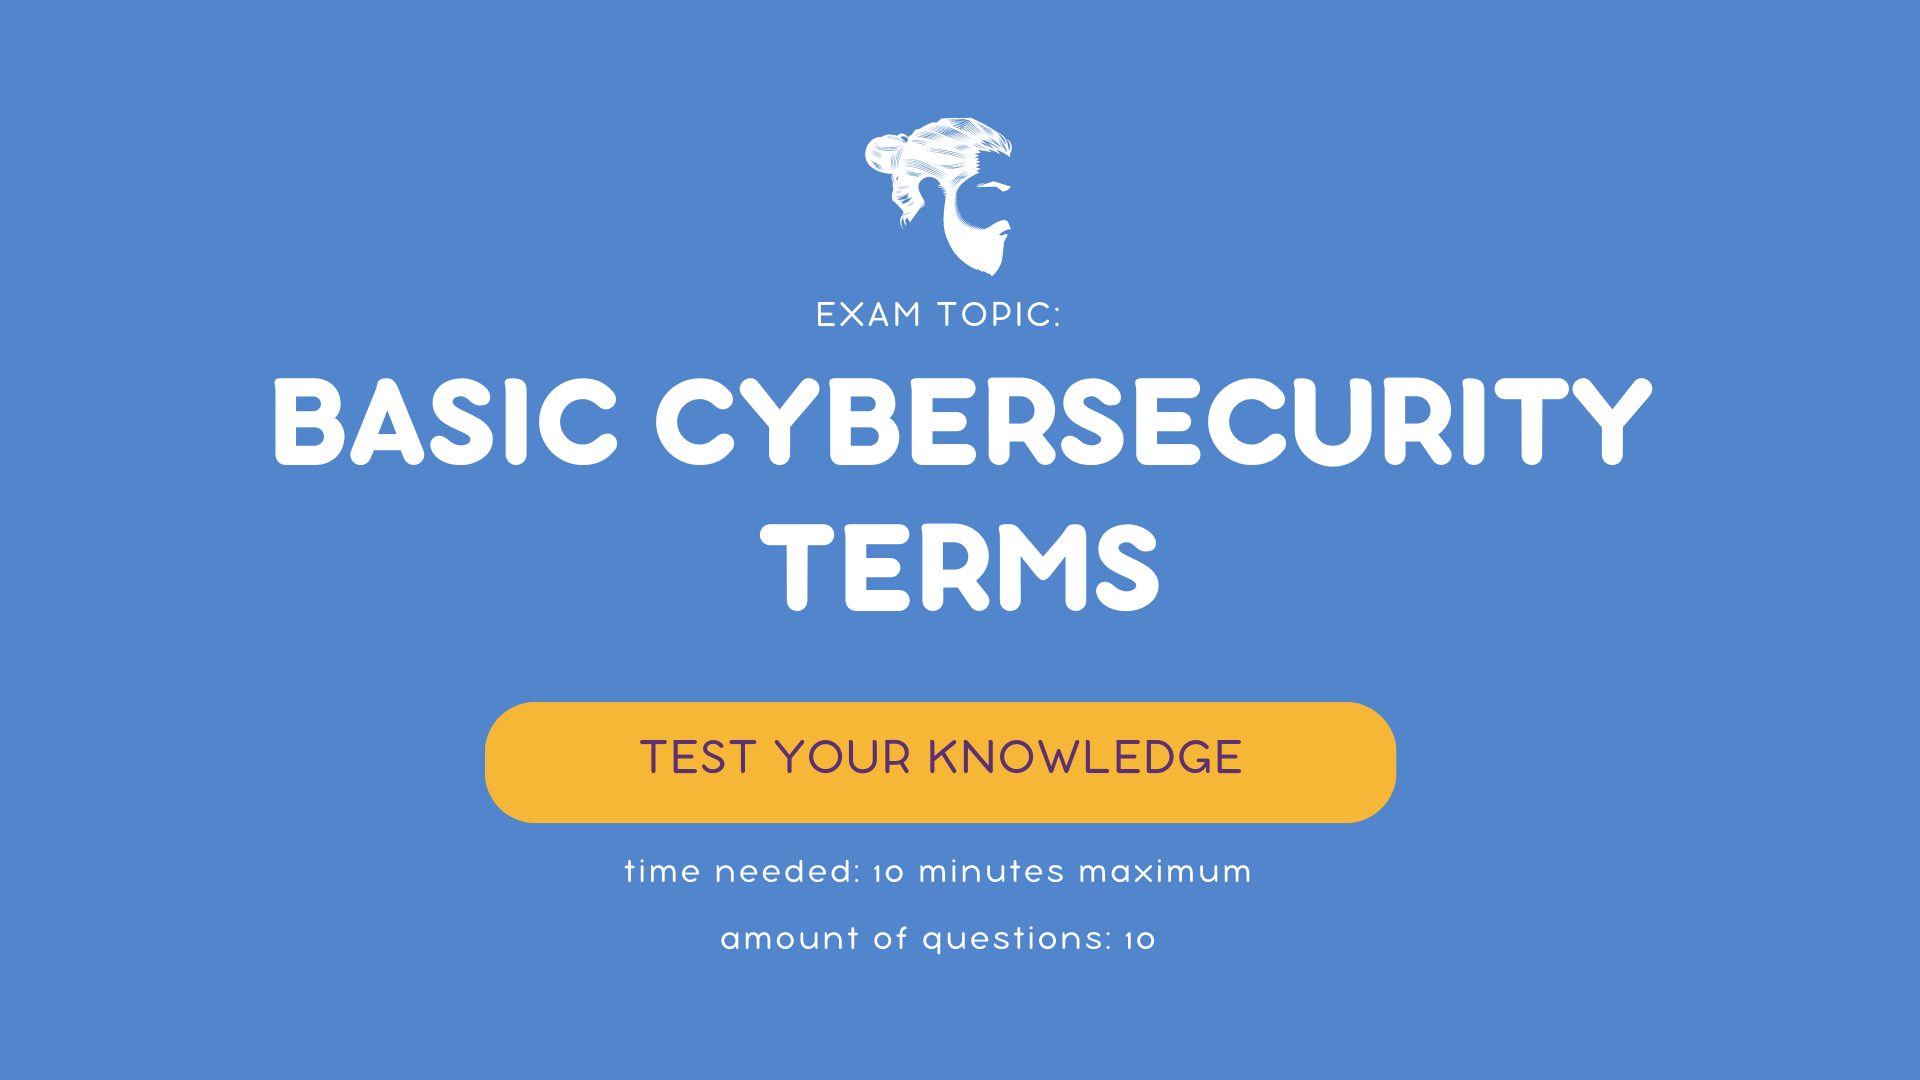 Basic Cybersecurity Terms Exam